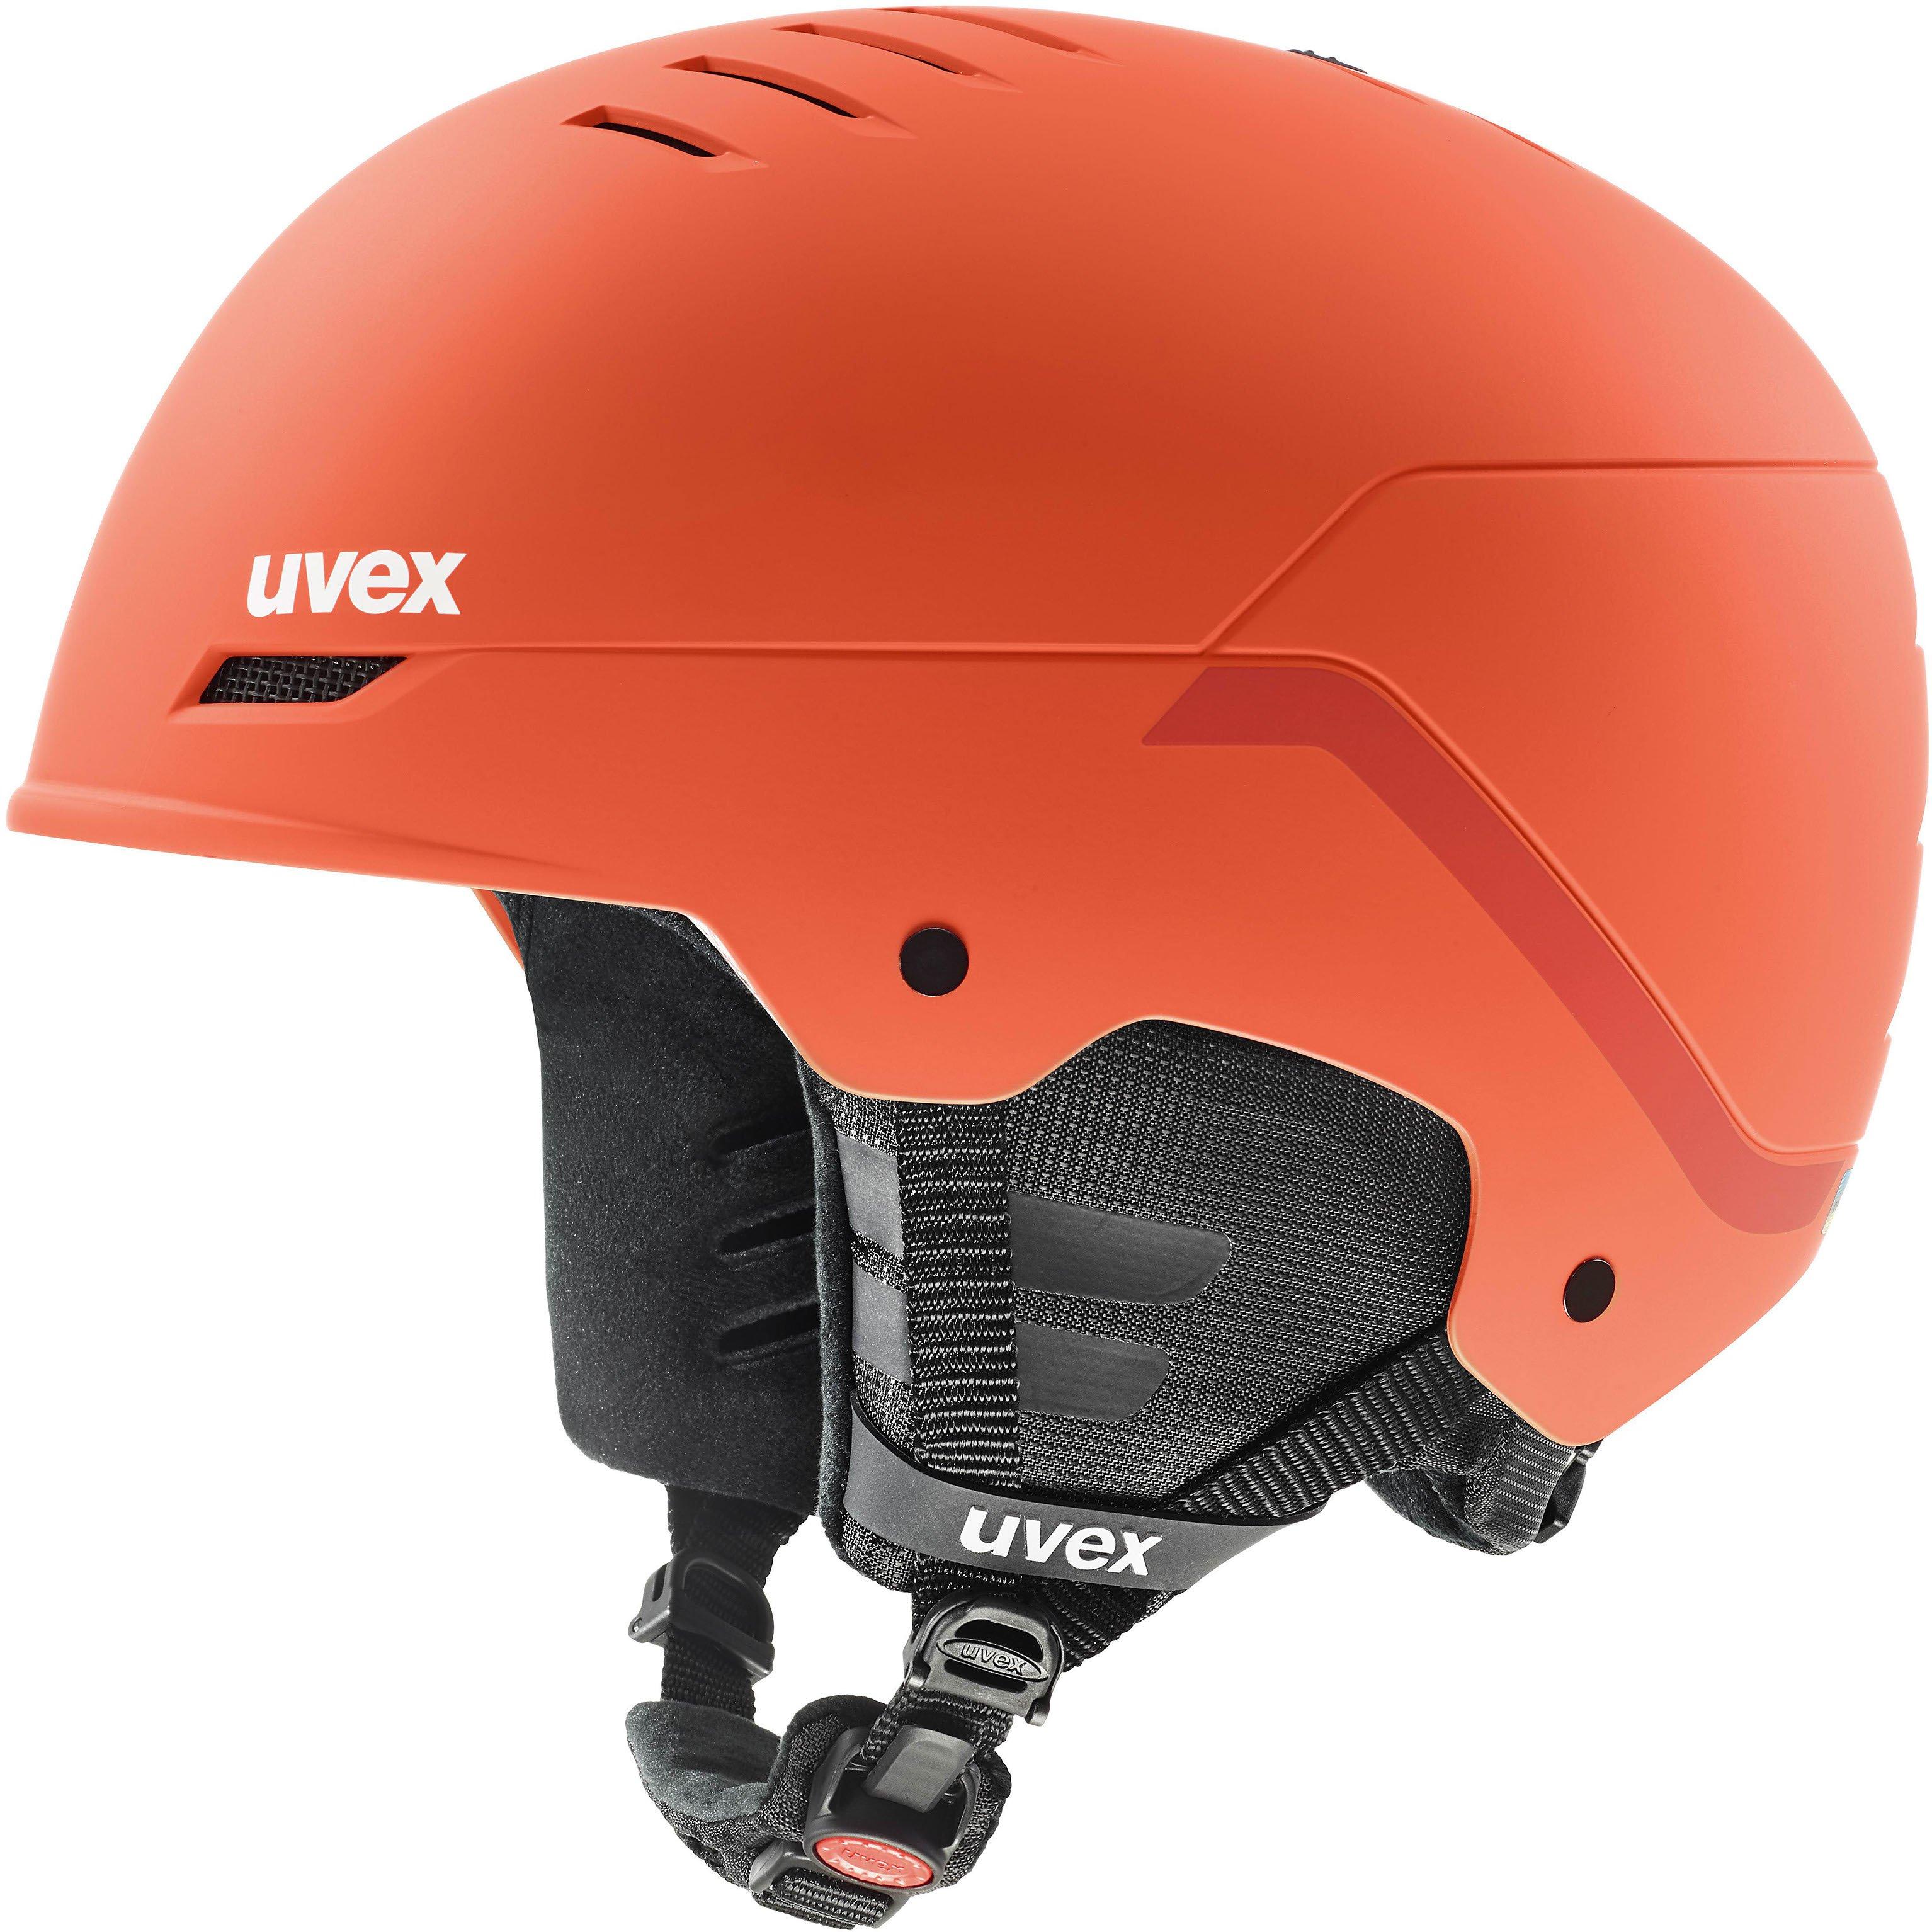 Uvex Wanted 54-58 cm